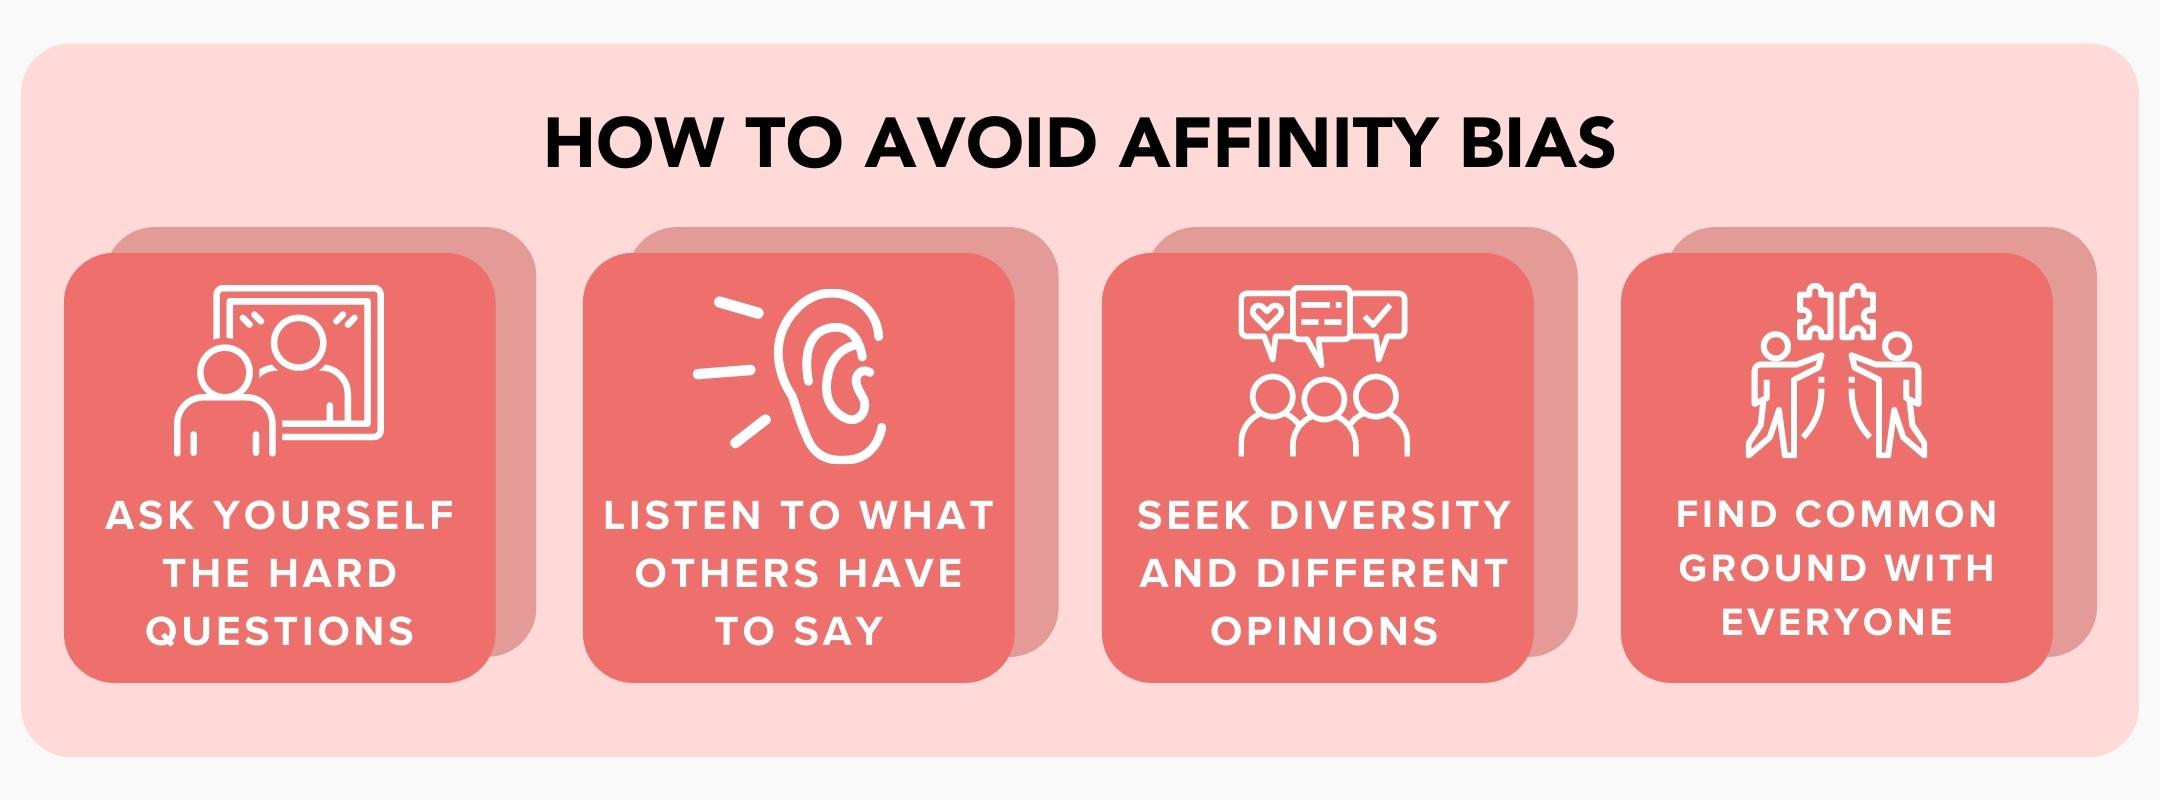 Affinity bias is really common, and while having some common ground can help with cultural fit, just remember to also thoroughly evaluate their skills, too!